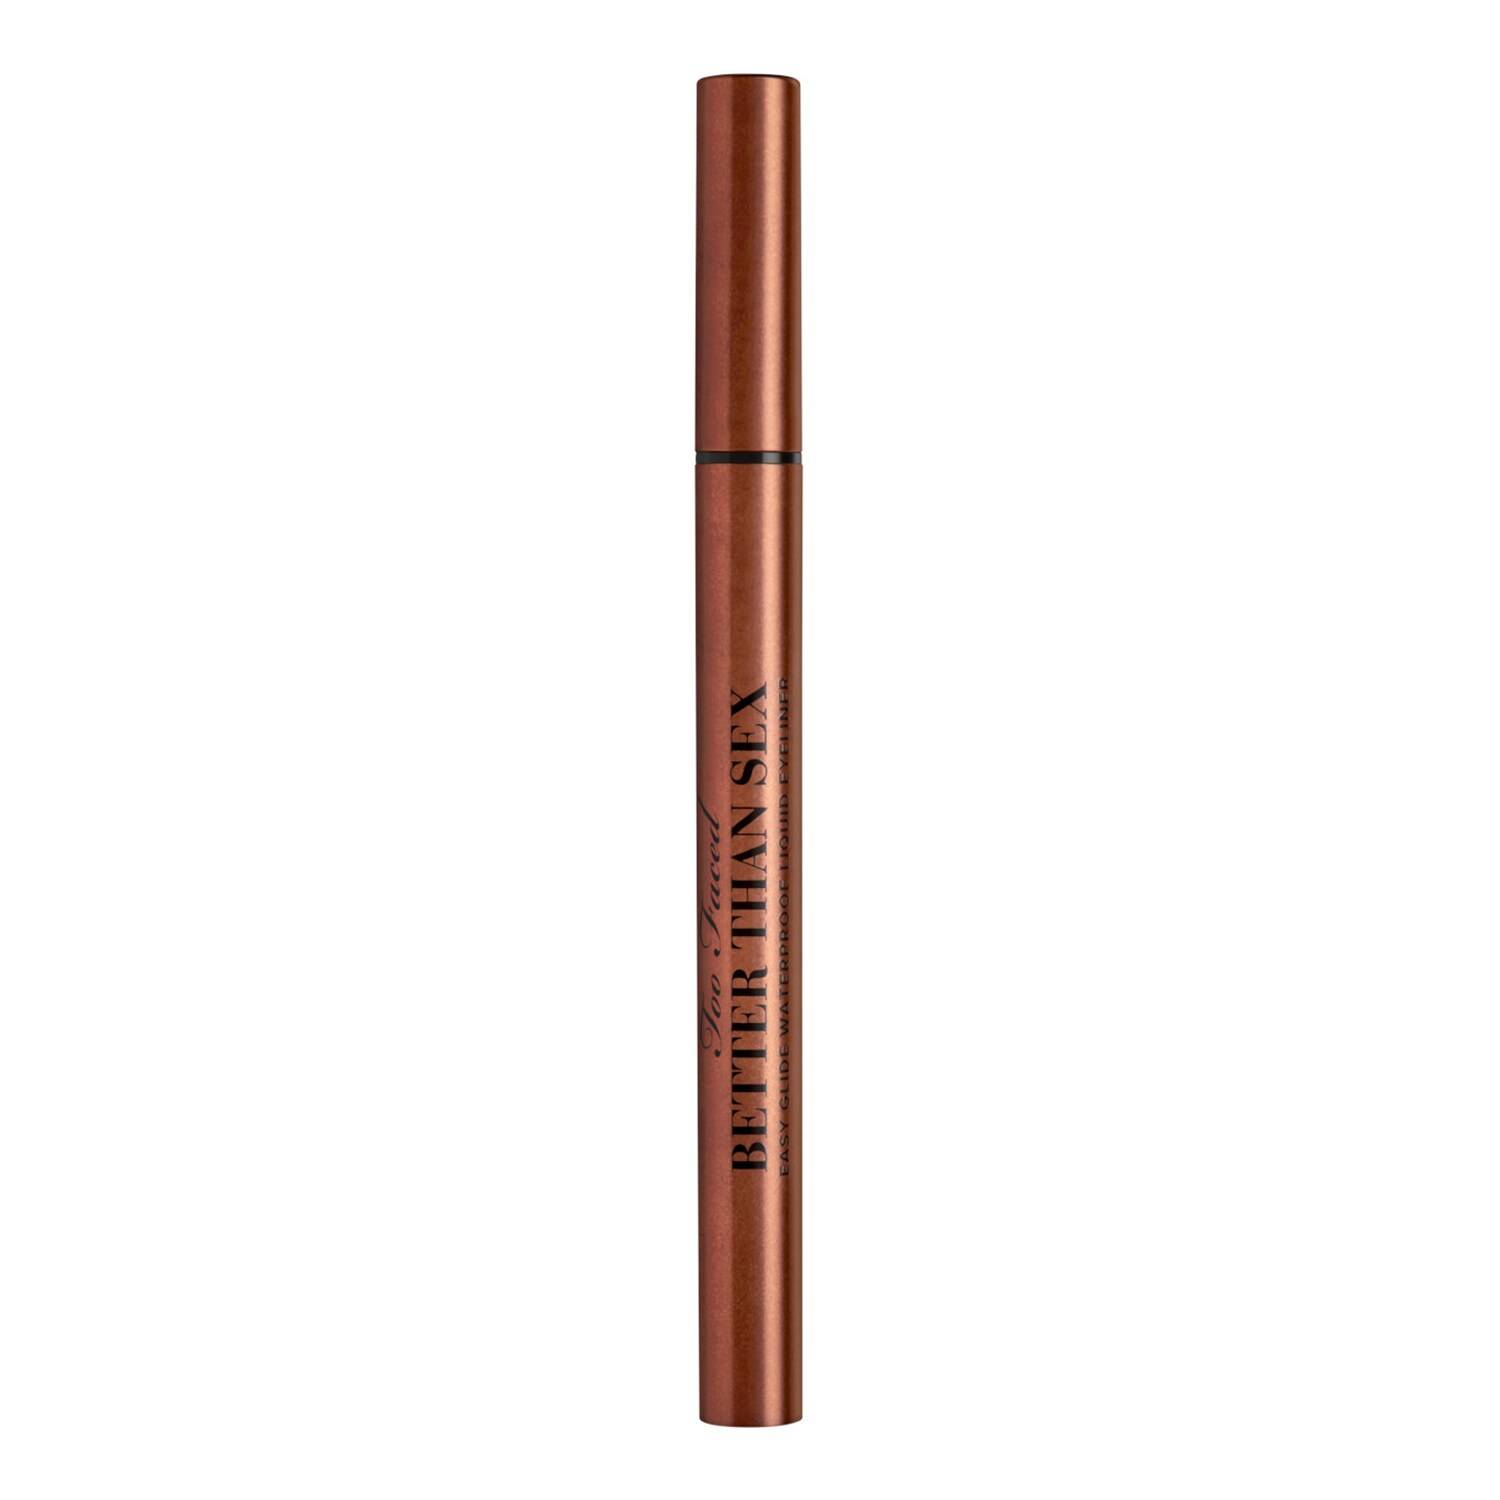 too faced better than sex chocolate eyeliner 0.6ml 0.6ml